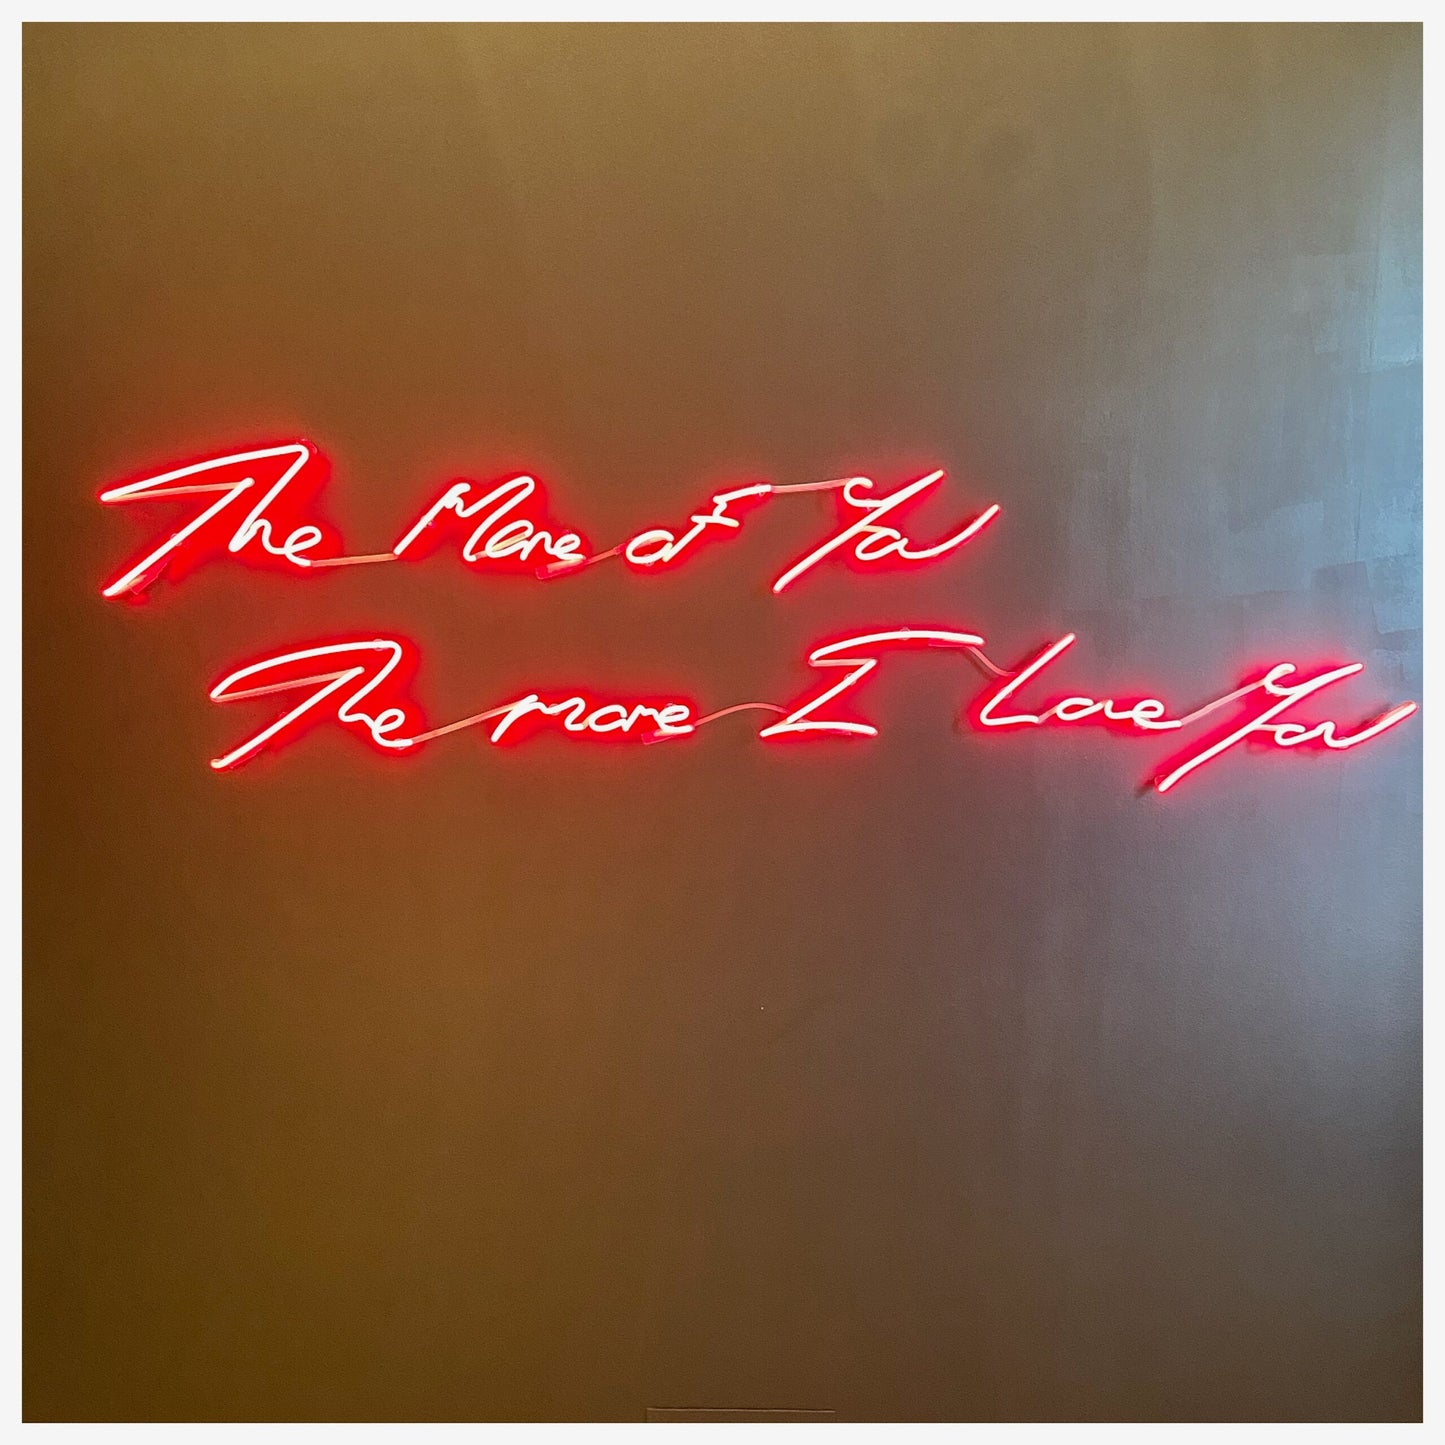 Tracey Emin Says - Boucle